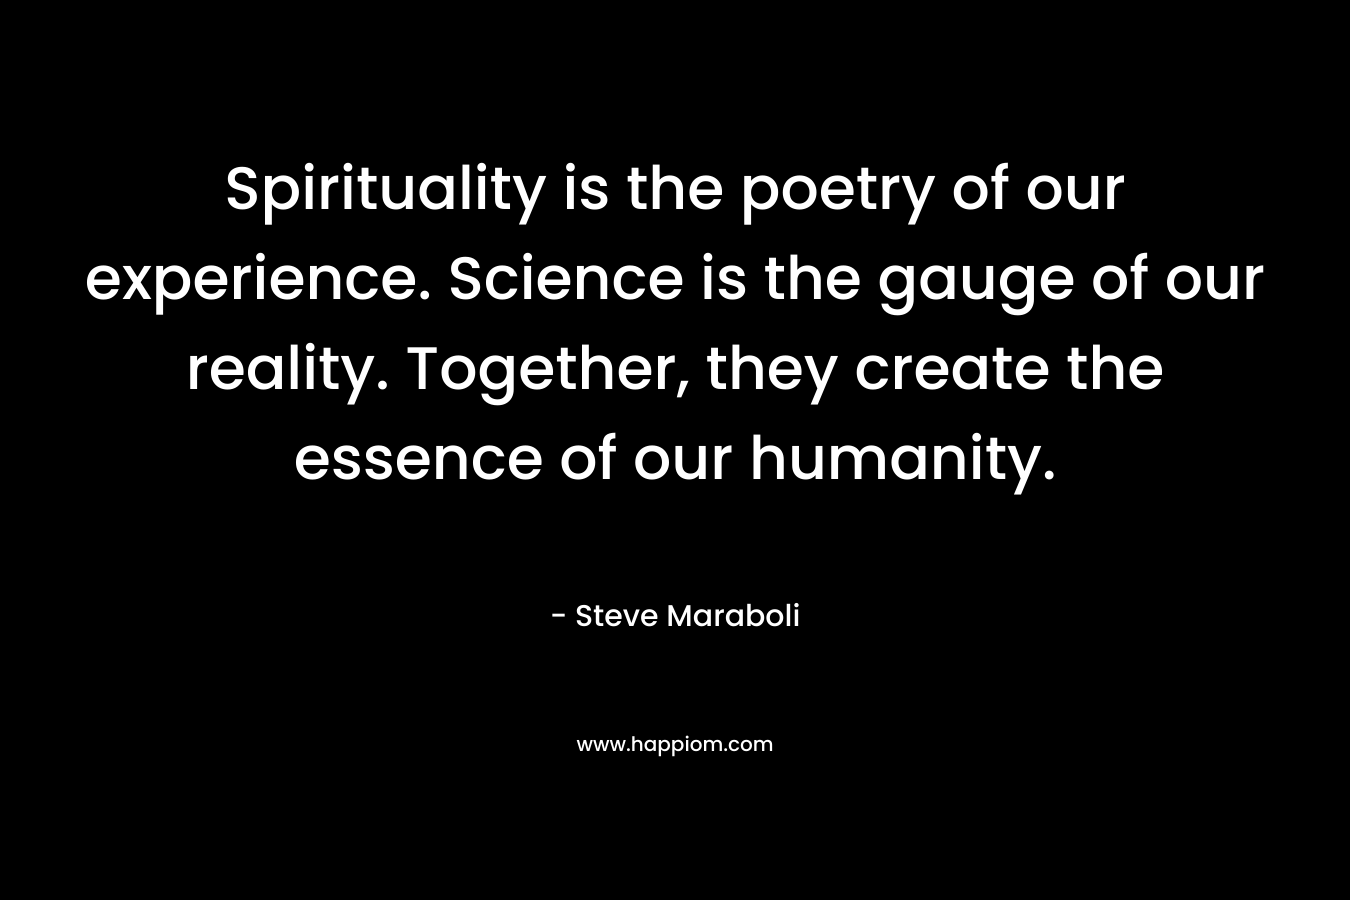 Spirituality is the poetry of our experience. Science is the gauge of our reality. Together, they create the essence of our humanity. – Steve Maraboli